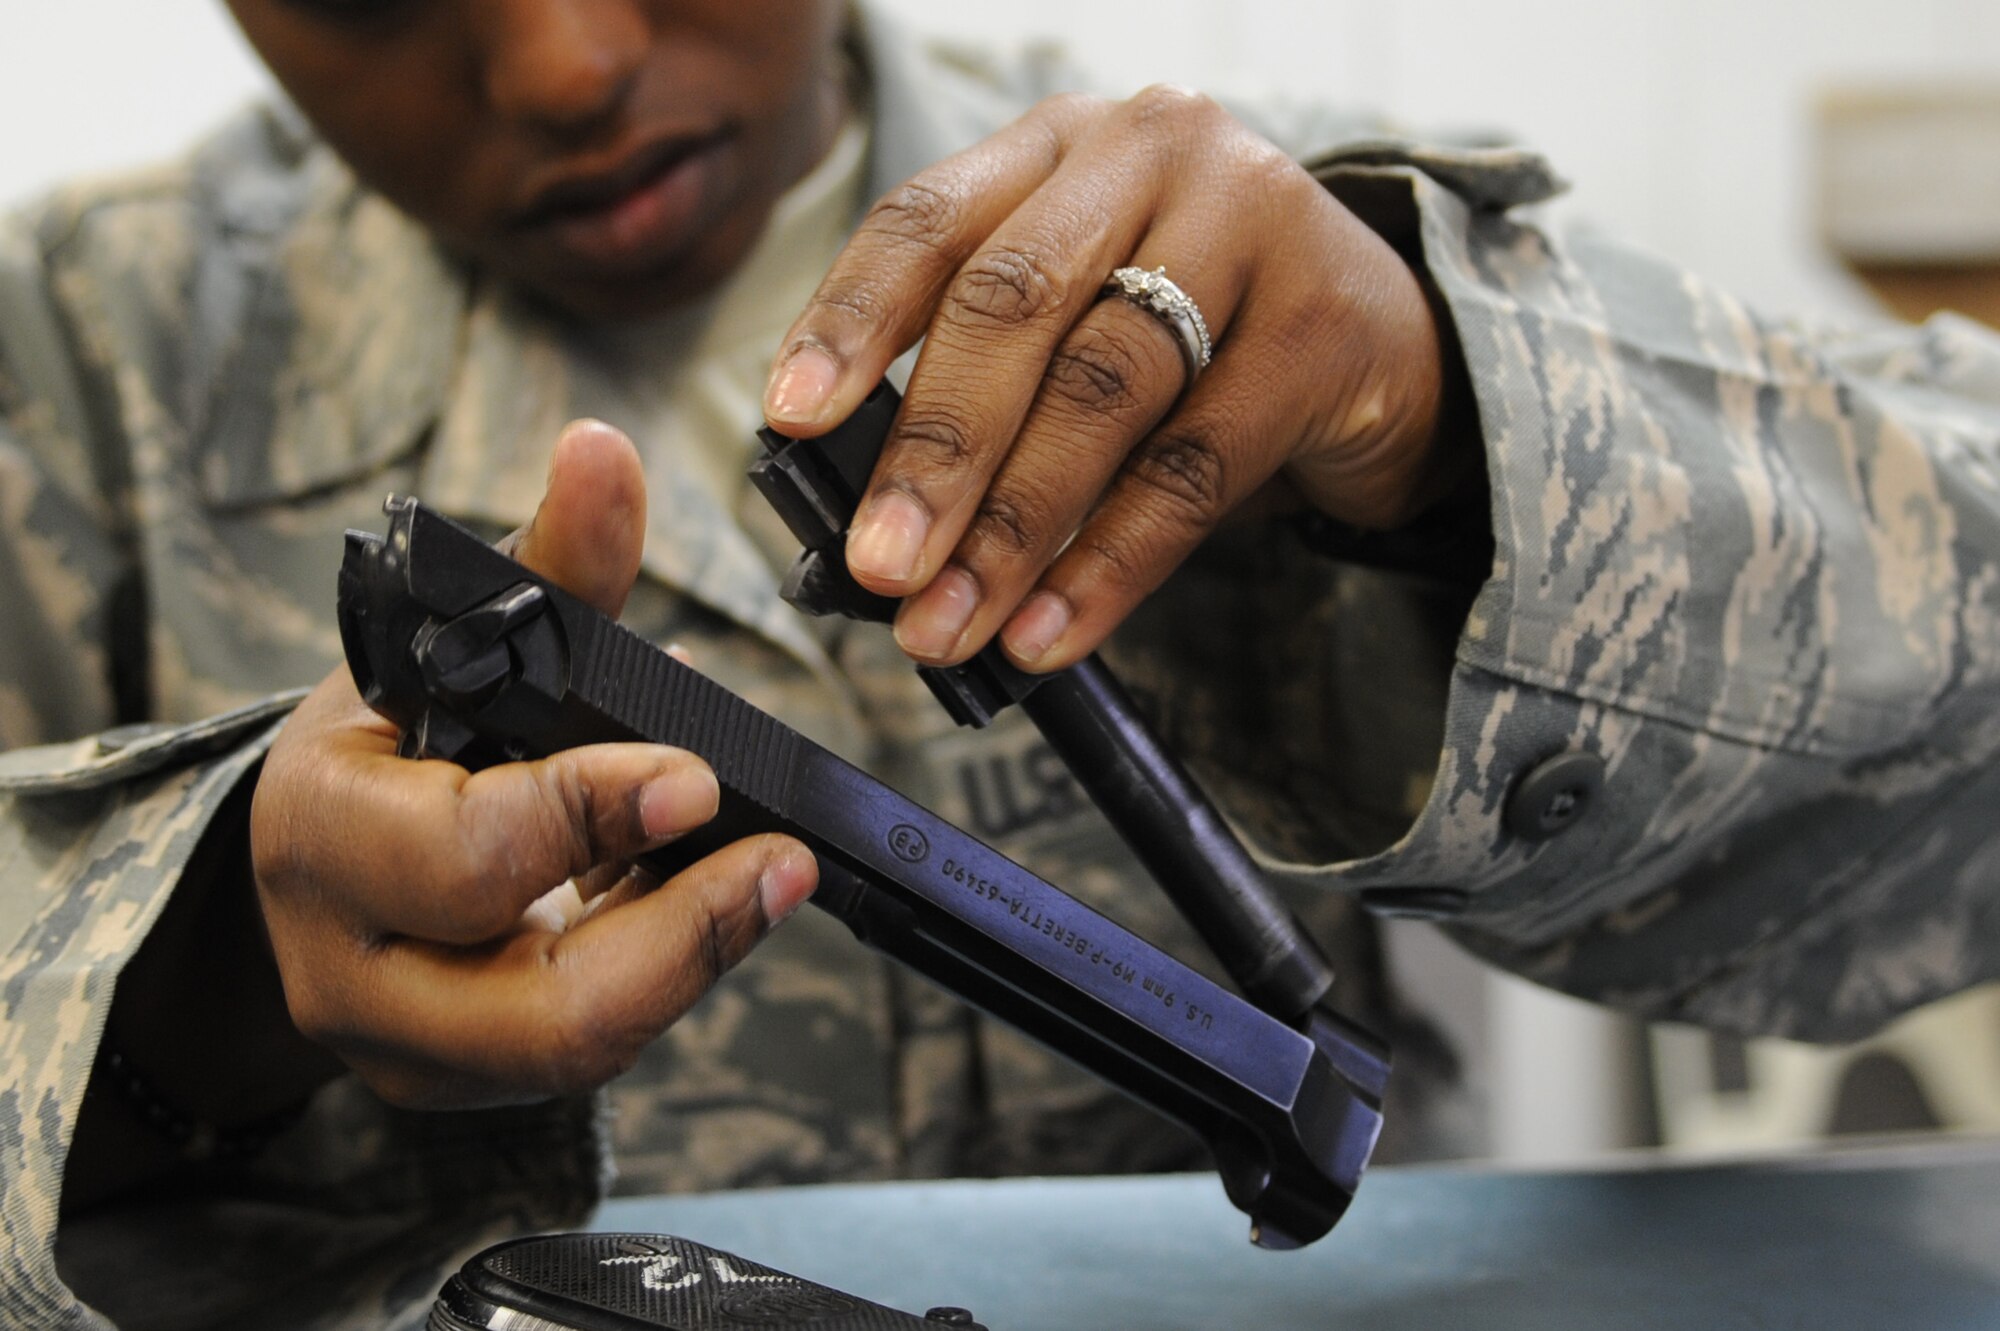 WHITEMAN AIR FORCE BASE, Mo. -  A 509th Security Forces Squadron Airman disassembles an M-9 pistol during combat arms training here, March 16, 2010.(U.S. Air Force photo by Airman 1st Class Carlin Leslie)(Released)


